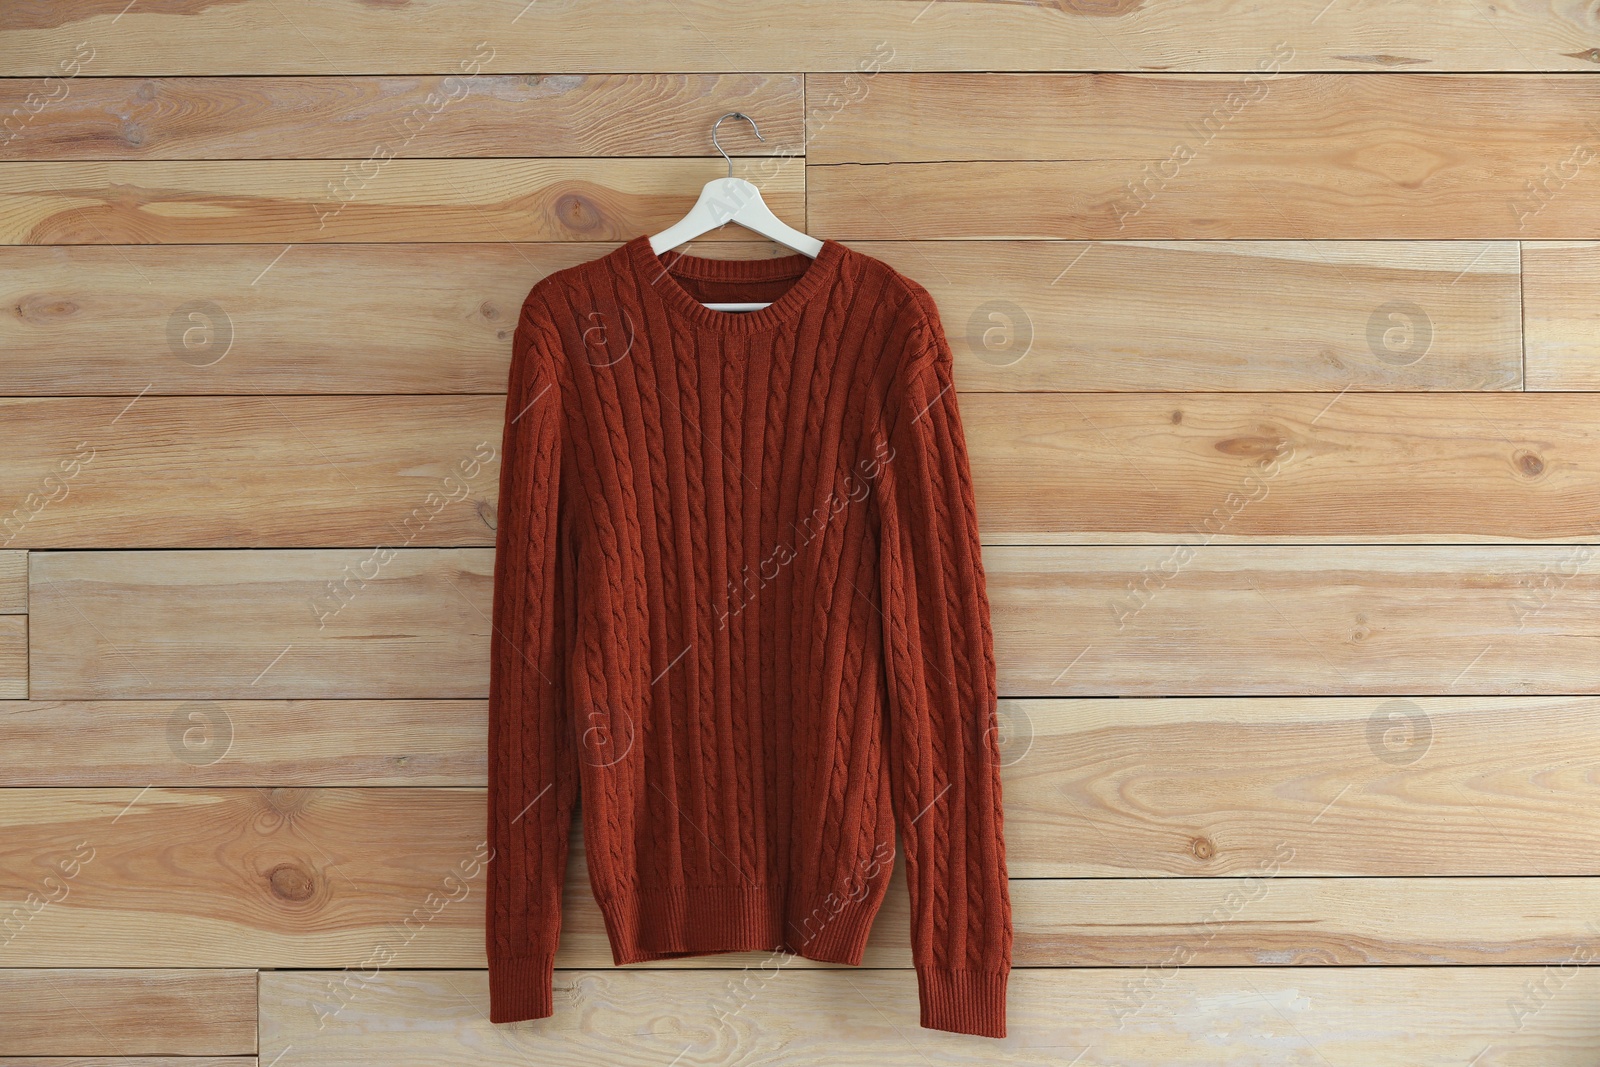 Photo of Hanger with stylish sweater on wooden wall